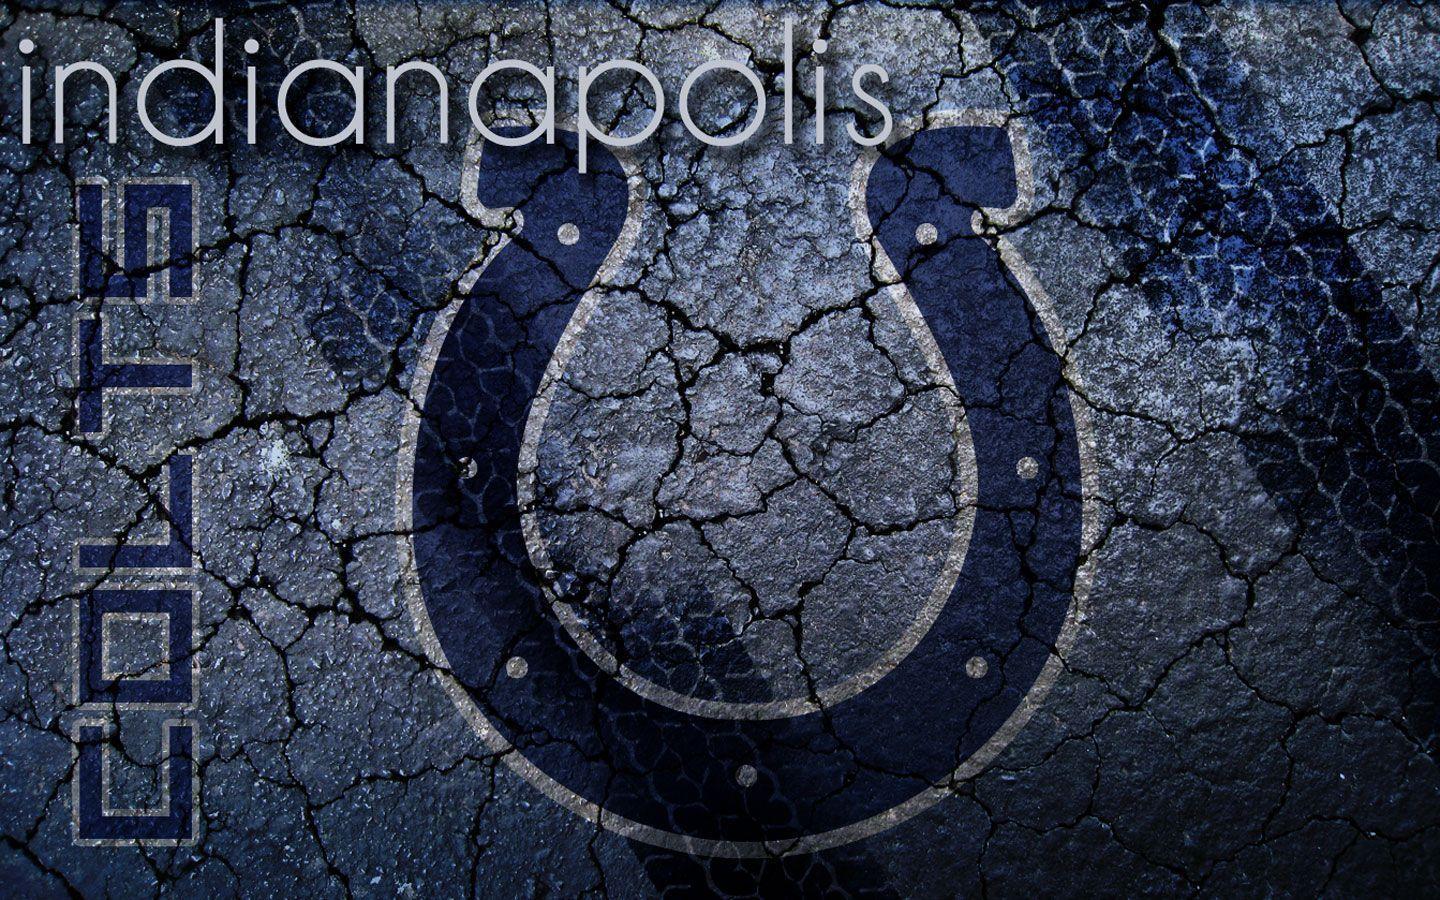 Indianapolis Colts Wallpaper. HD Wallpaper Early